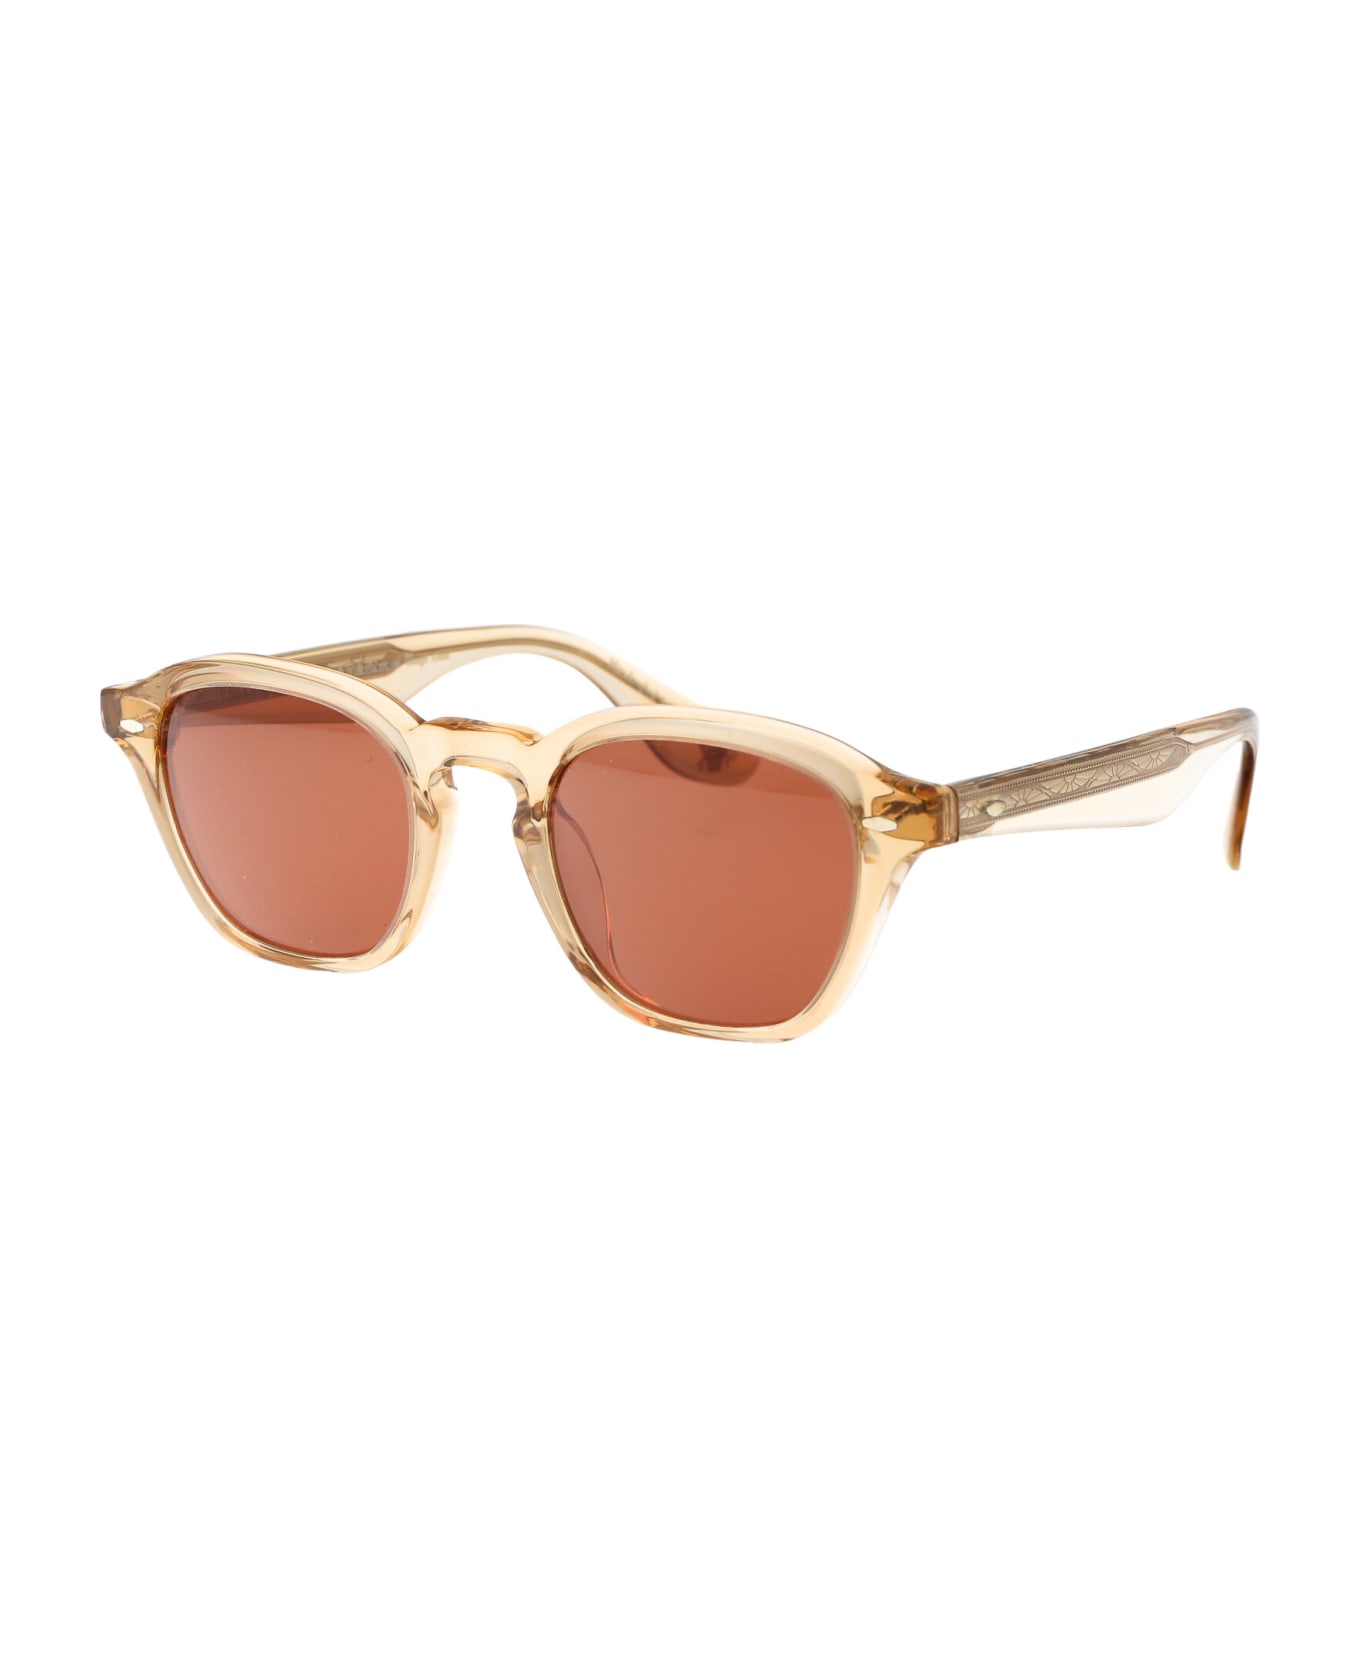 Oliver Peoples Peppe Sunglasses - 176653 Champagne